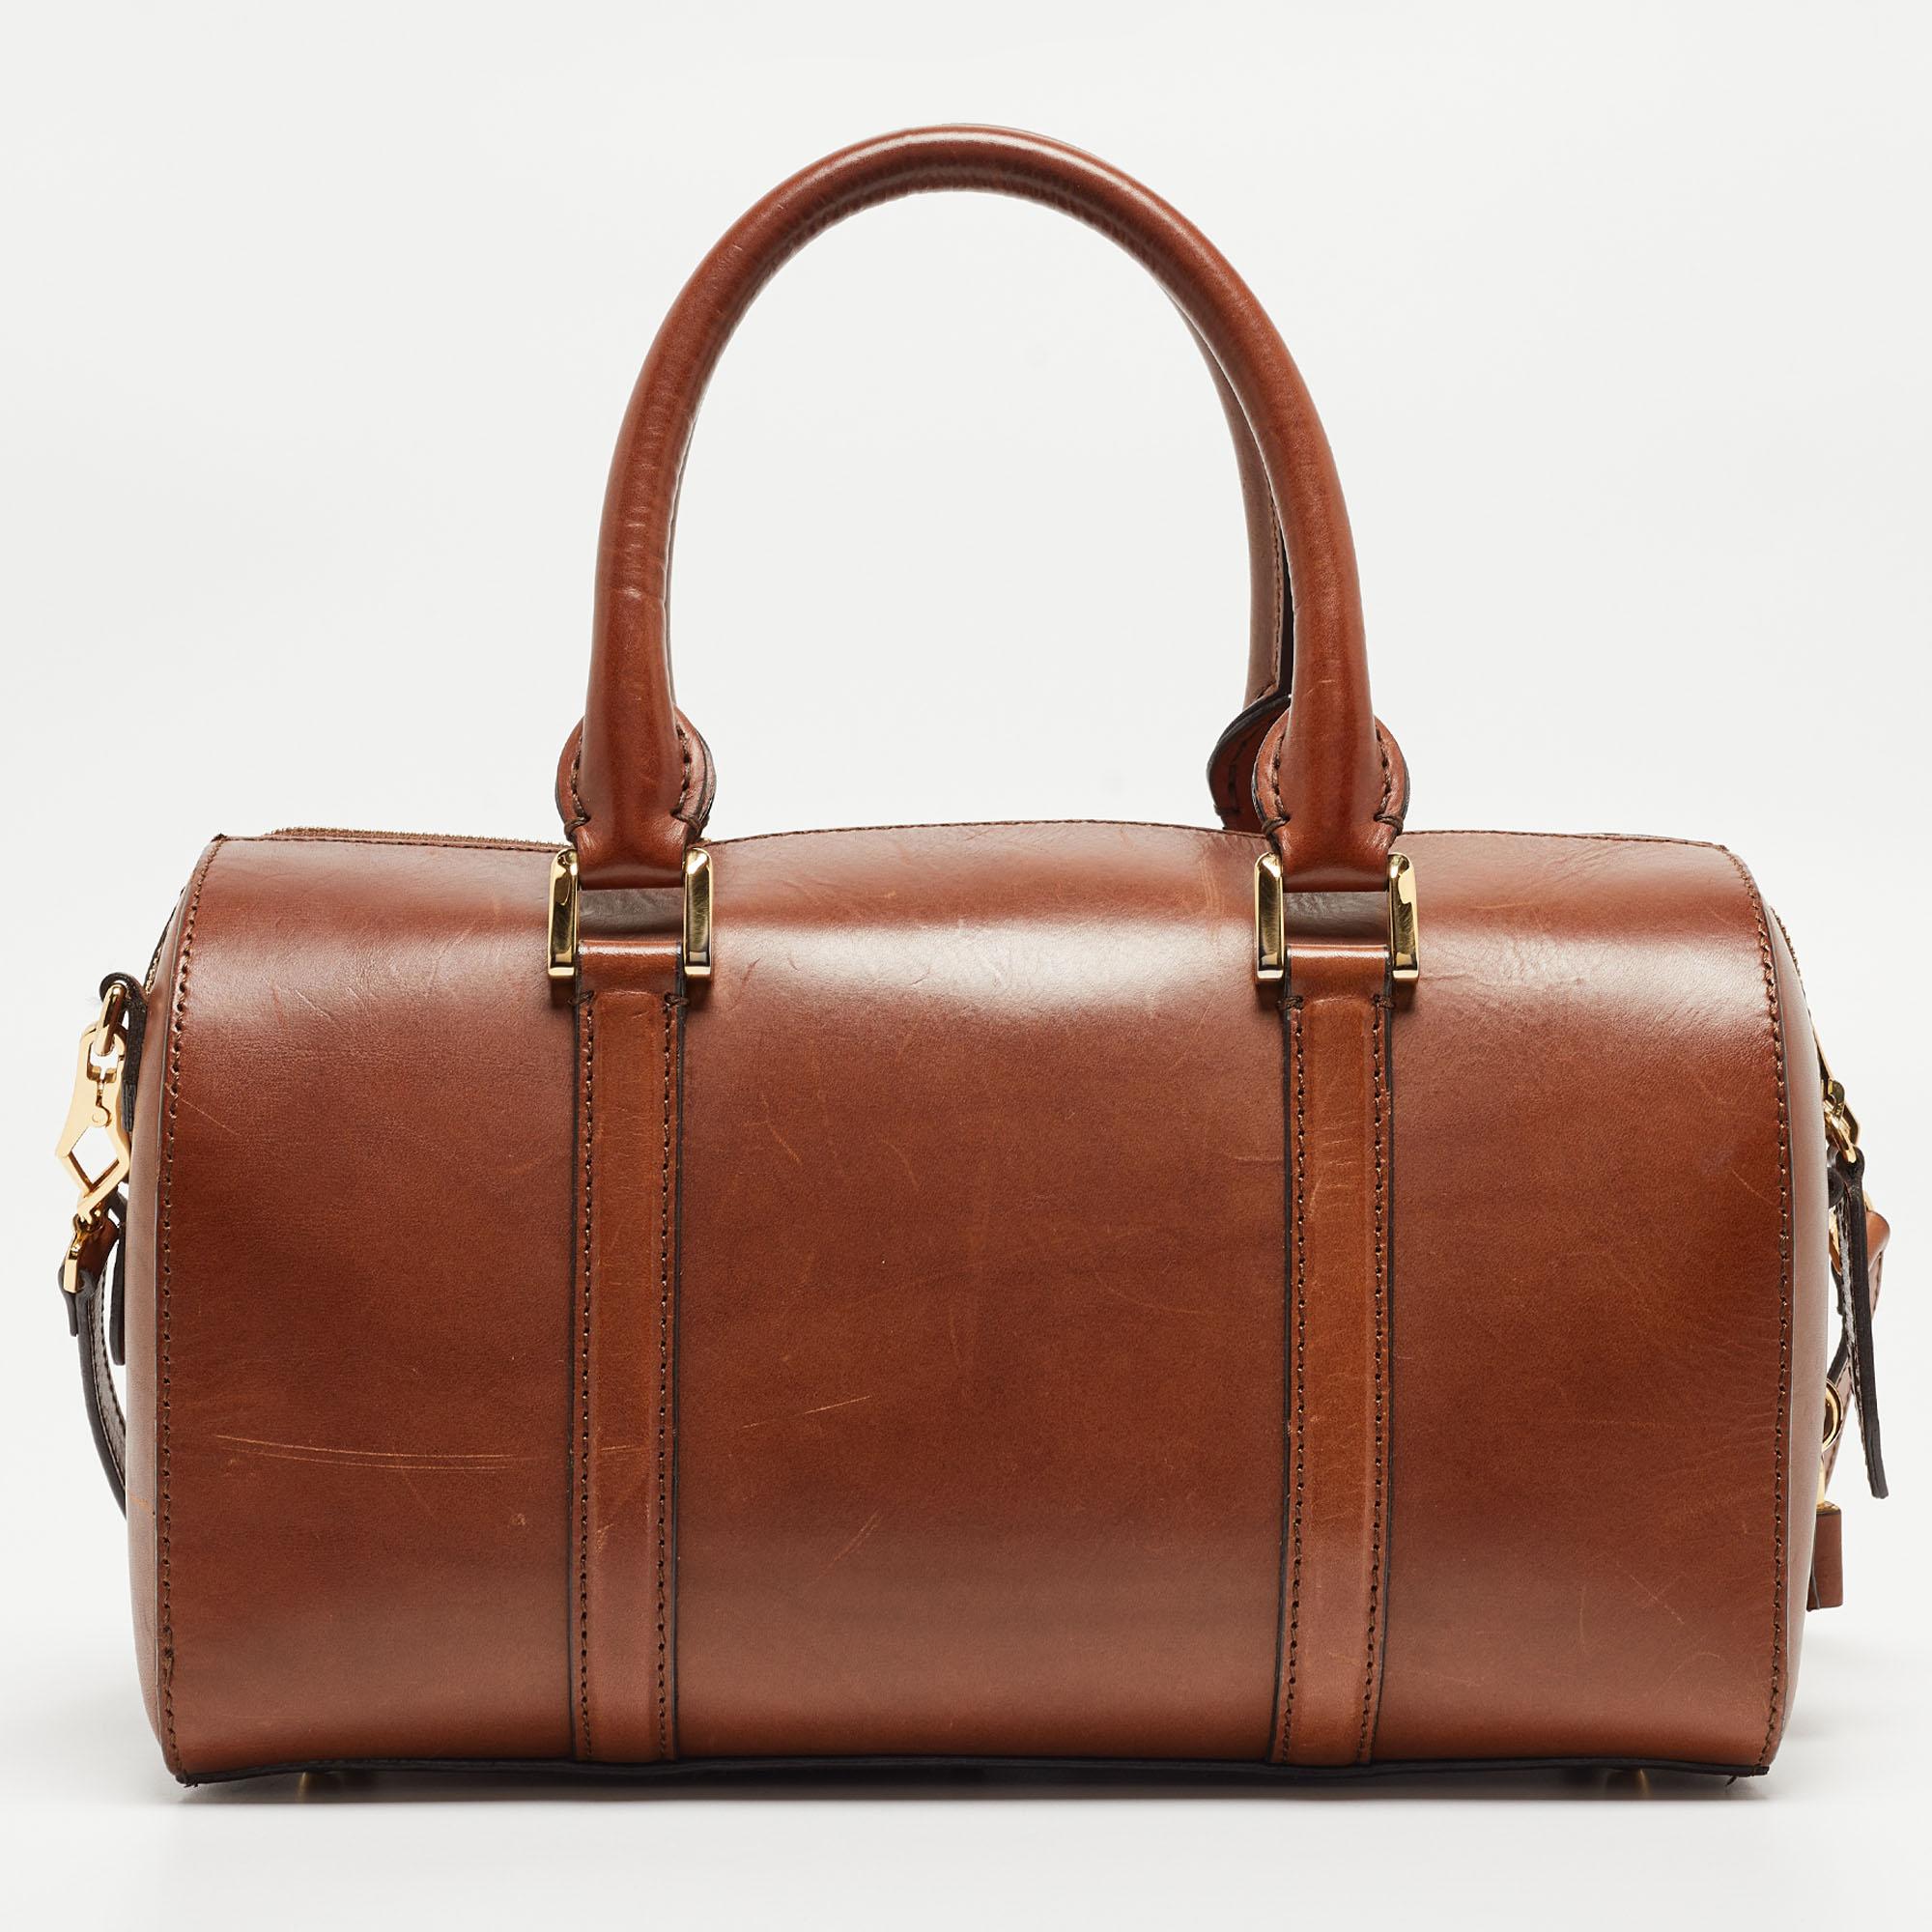 A classic handbag comes with the promise of enduring appeal, boosting your style time and again. This Burberry brown bag is one such creation. It’s a fine purchase.

Includes: Detachable Strap, Padlock and Keys, Original Dustbag

